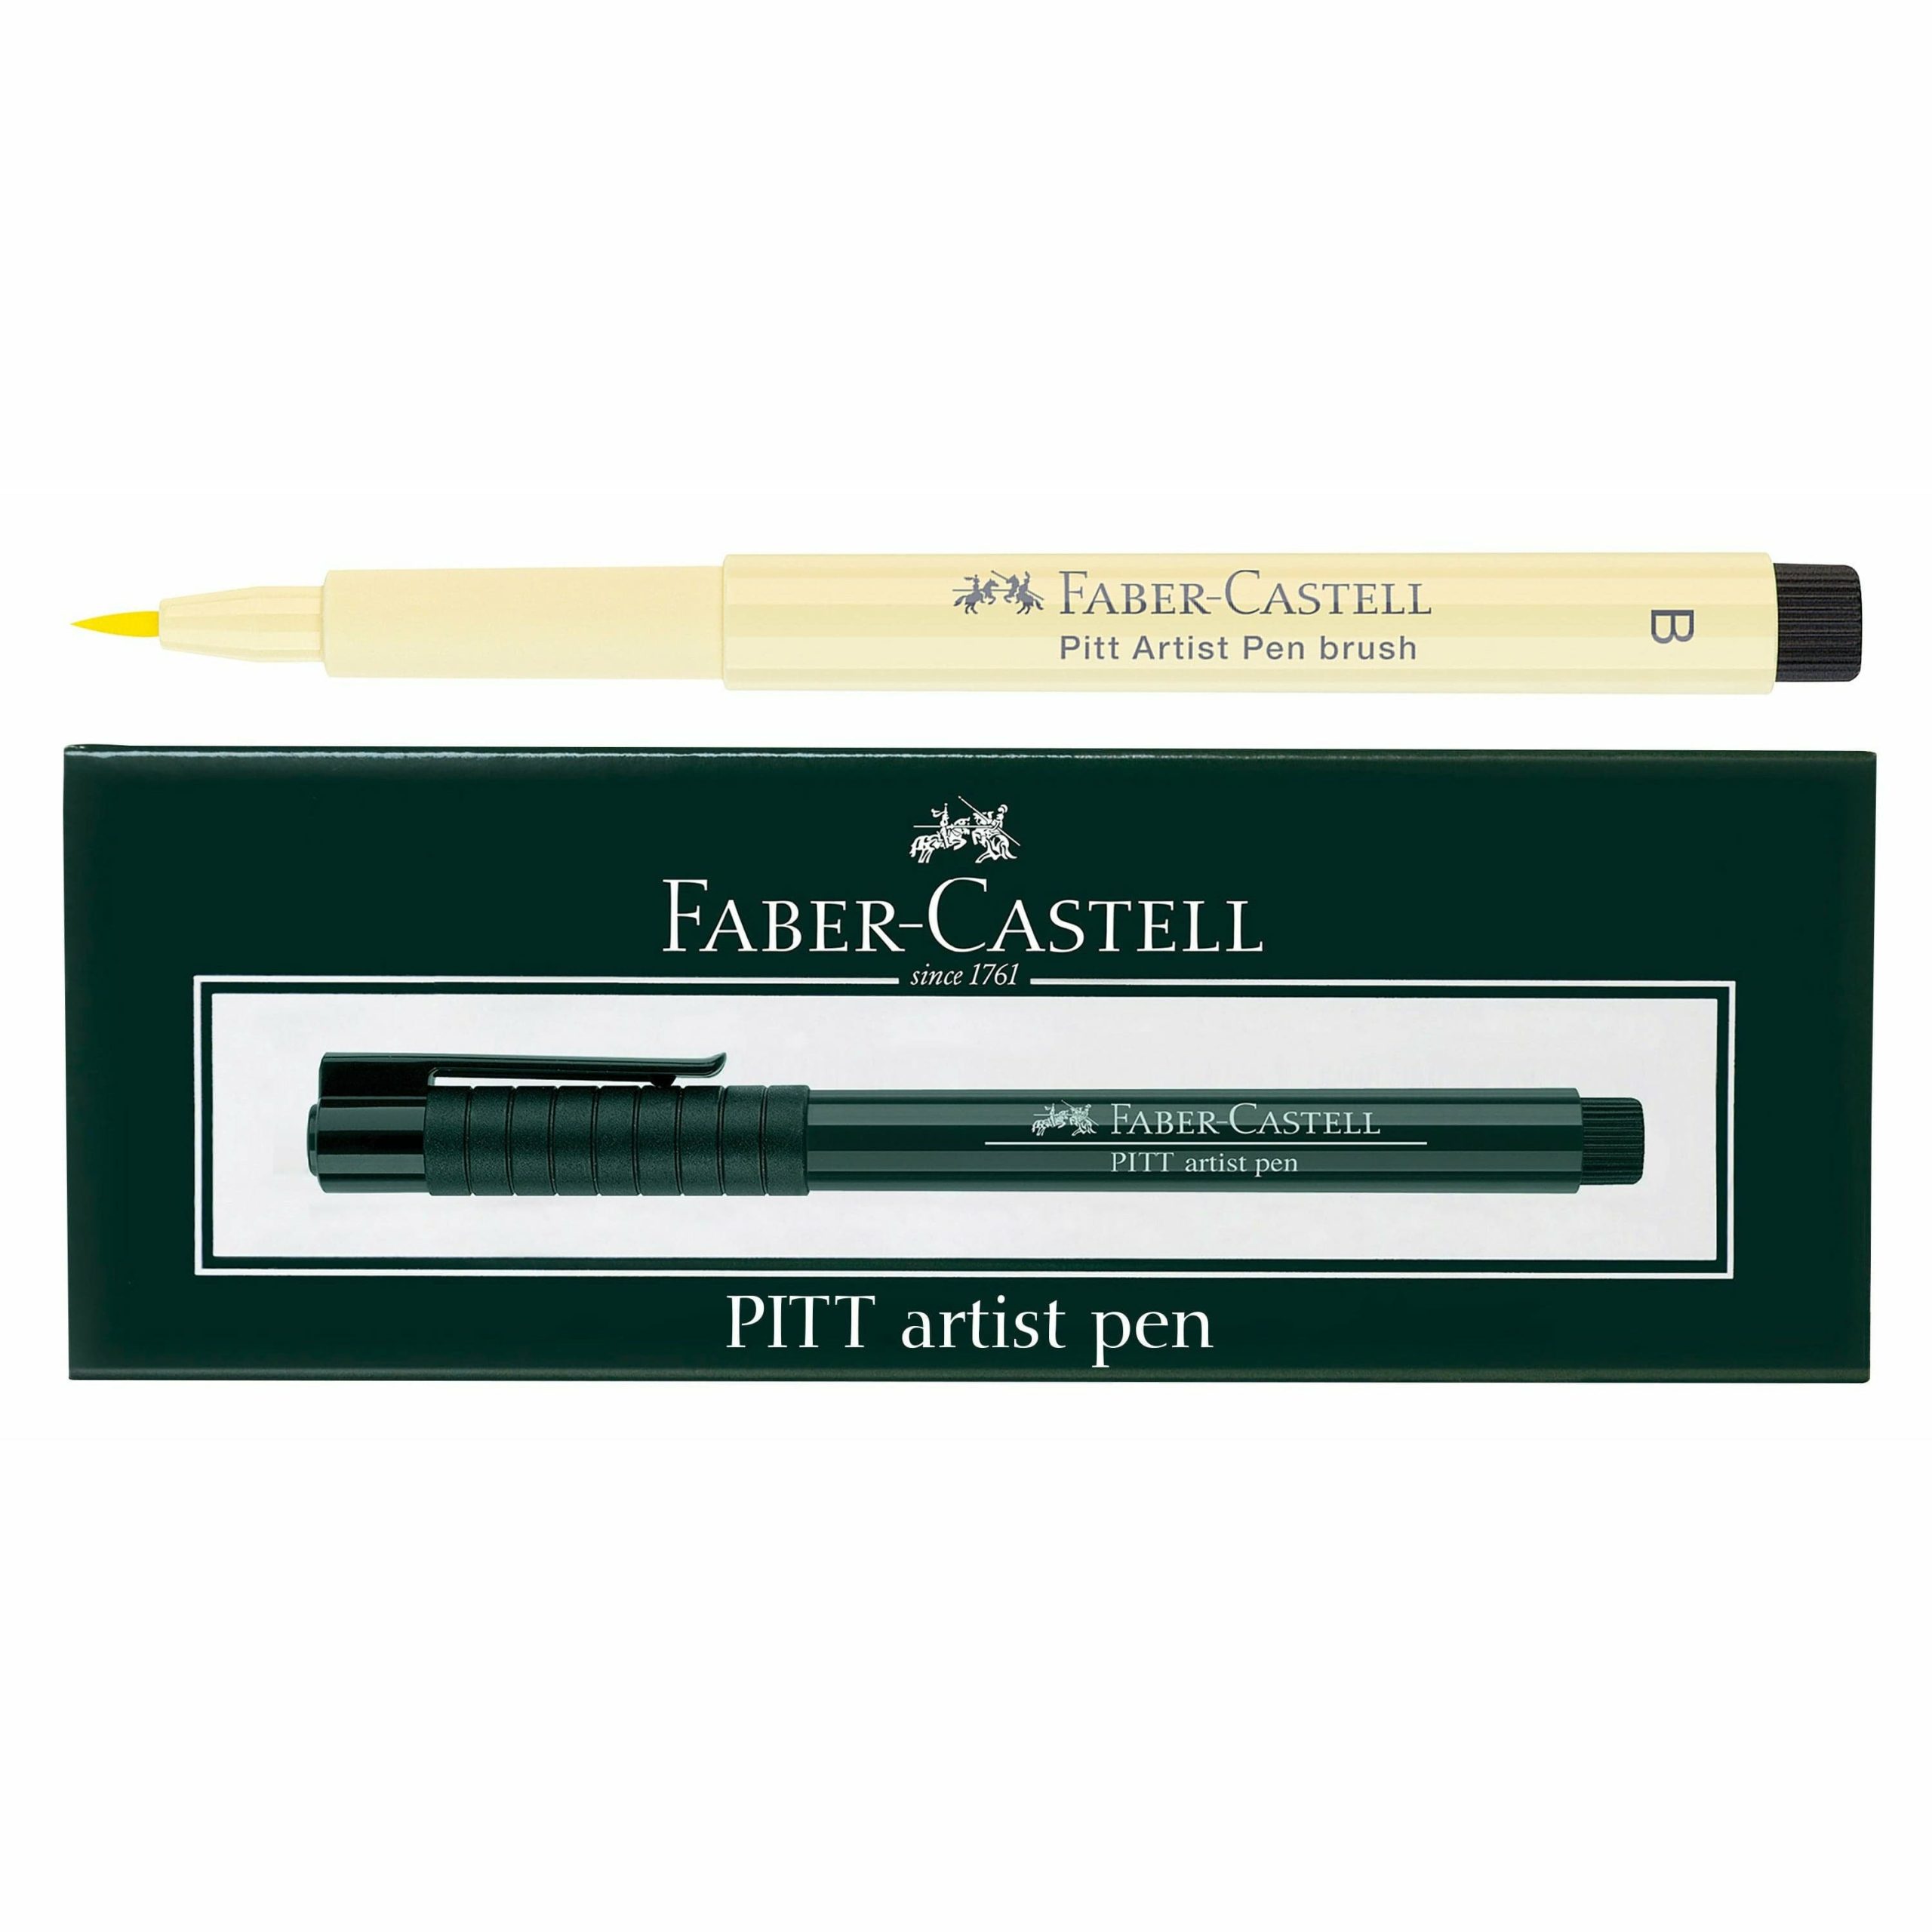 https://www.shopriot.shop/wp-content/uploads/1689/10/the-faber-castell-pitt-artist-brush-pen-103-ivory-159-at-incredible-price_1-scaled.jpg